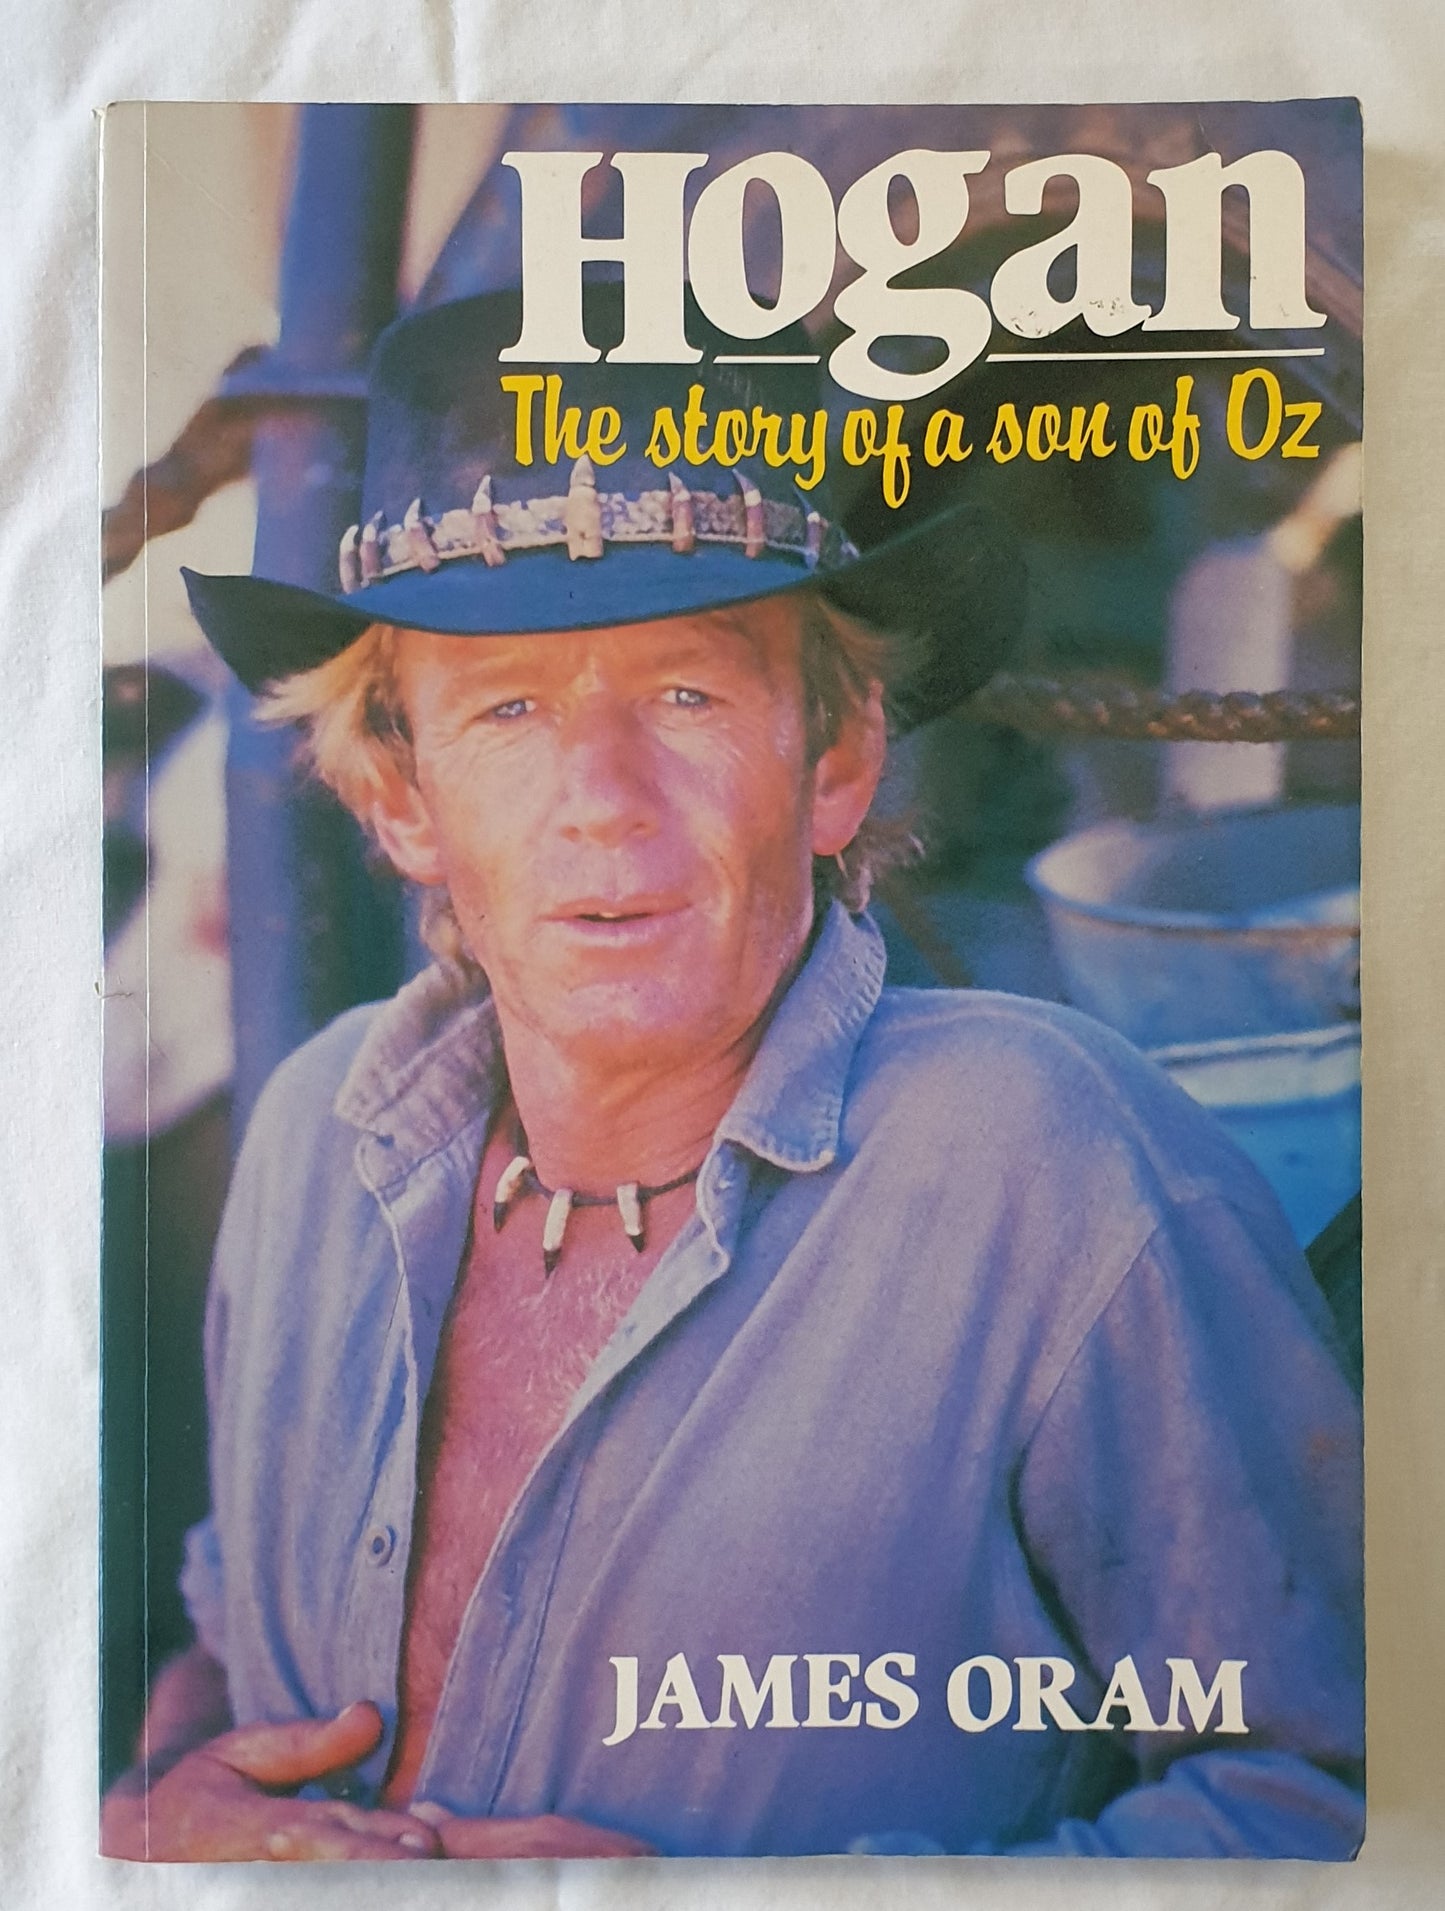 Hogan  The story of a son of Oz  by James Oram